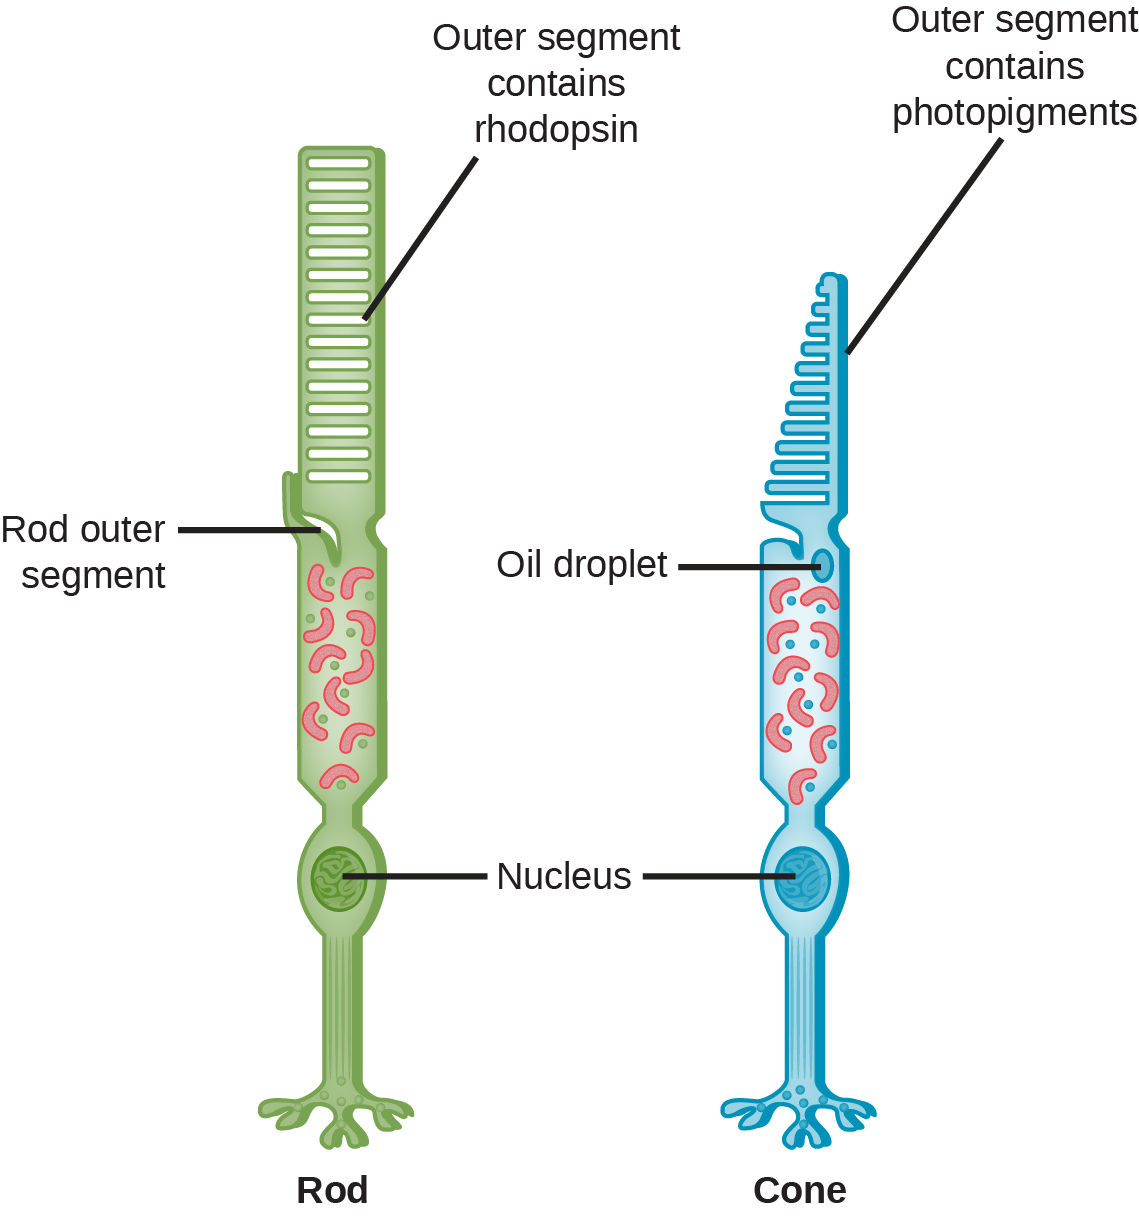 This illustration shows that rods and cones are both long, column-like cells with the nucleus located in the bottom portion. The rod is longer than the cone. The outer segment of the rod contains rhodopsin. The outer segment of the rod contains other photo-pigments. An oil droplet is located beneath the outer segment.